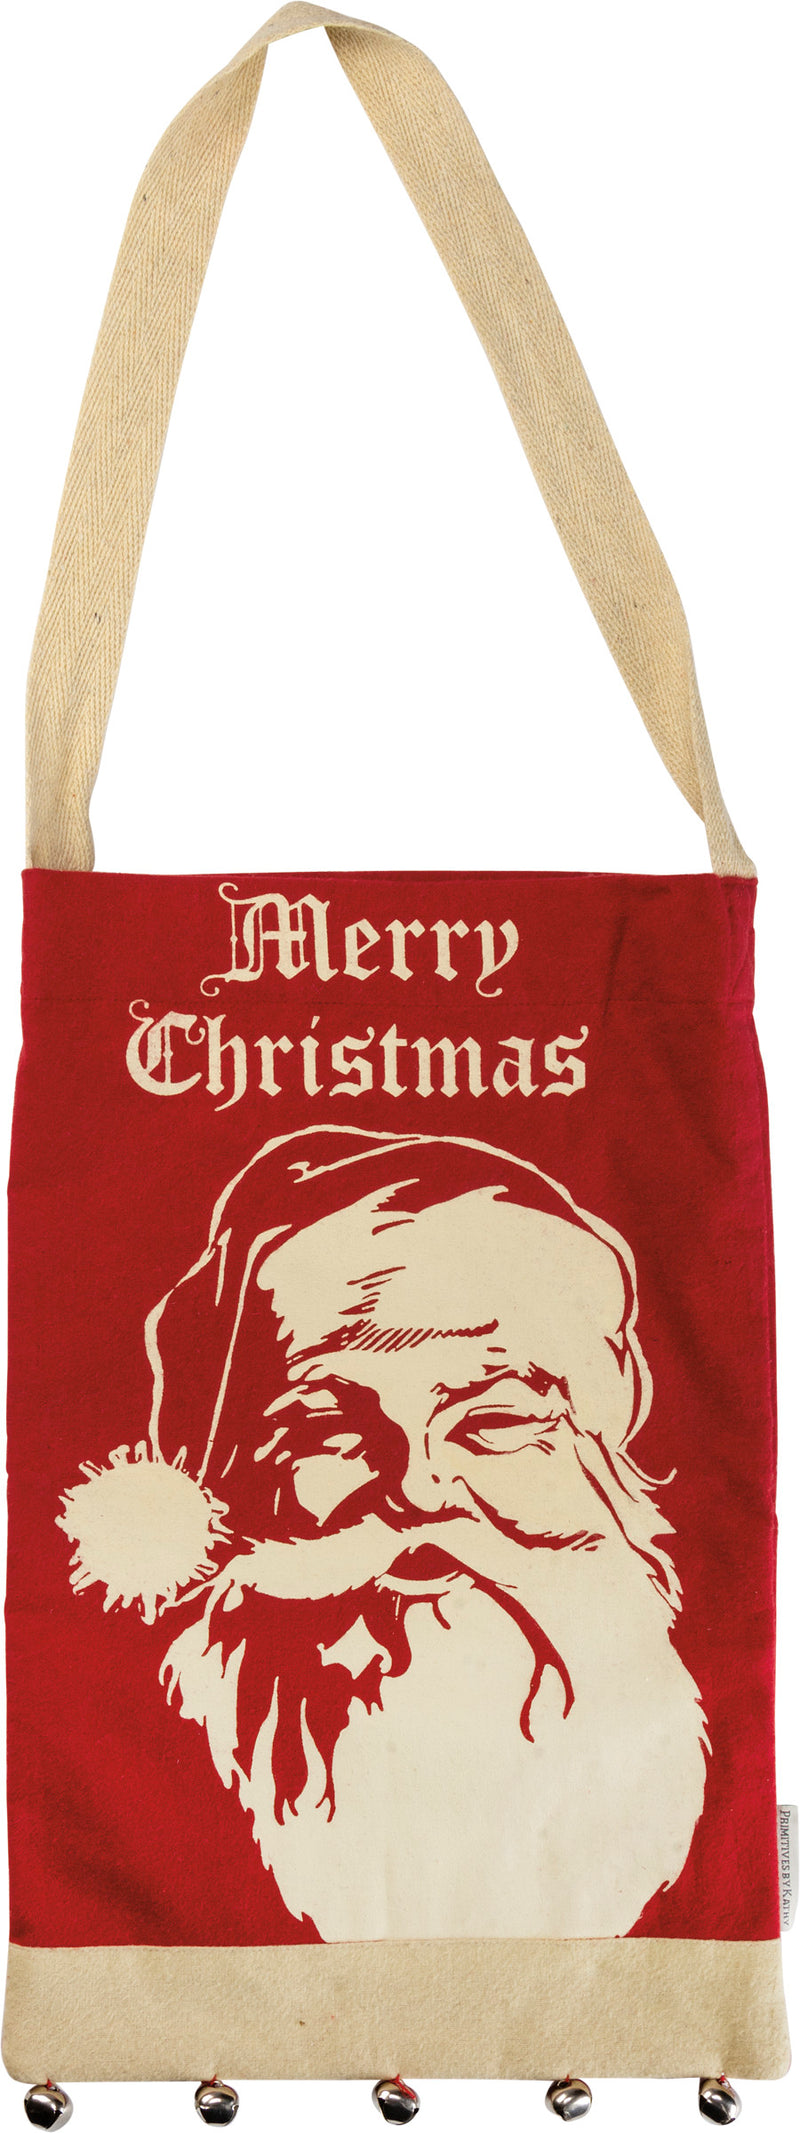 Merry Christmas Hanging Bag  (PACK OF 6)